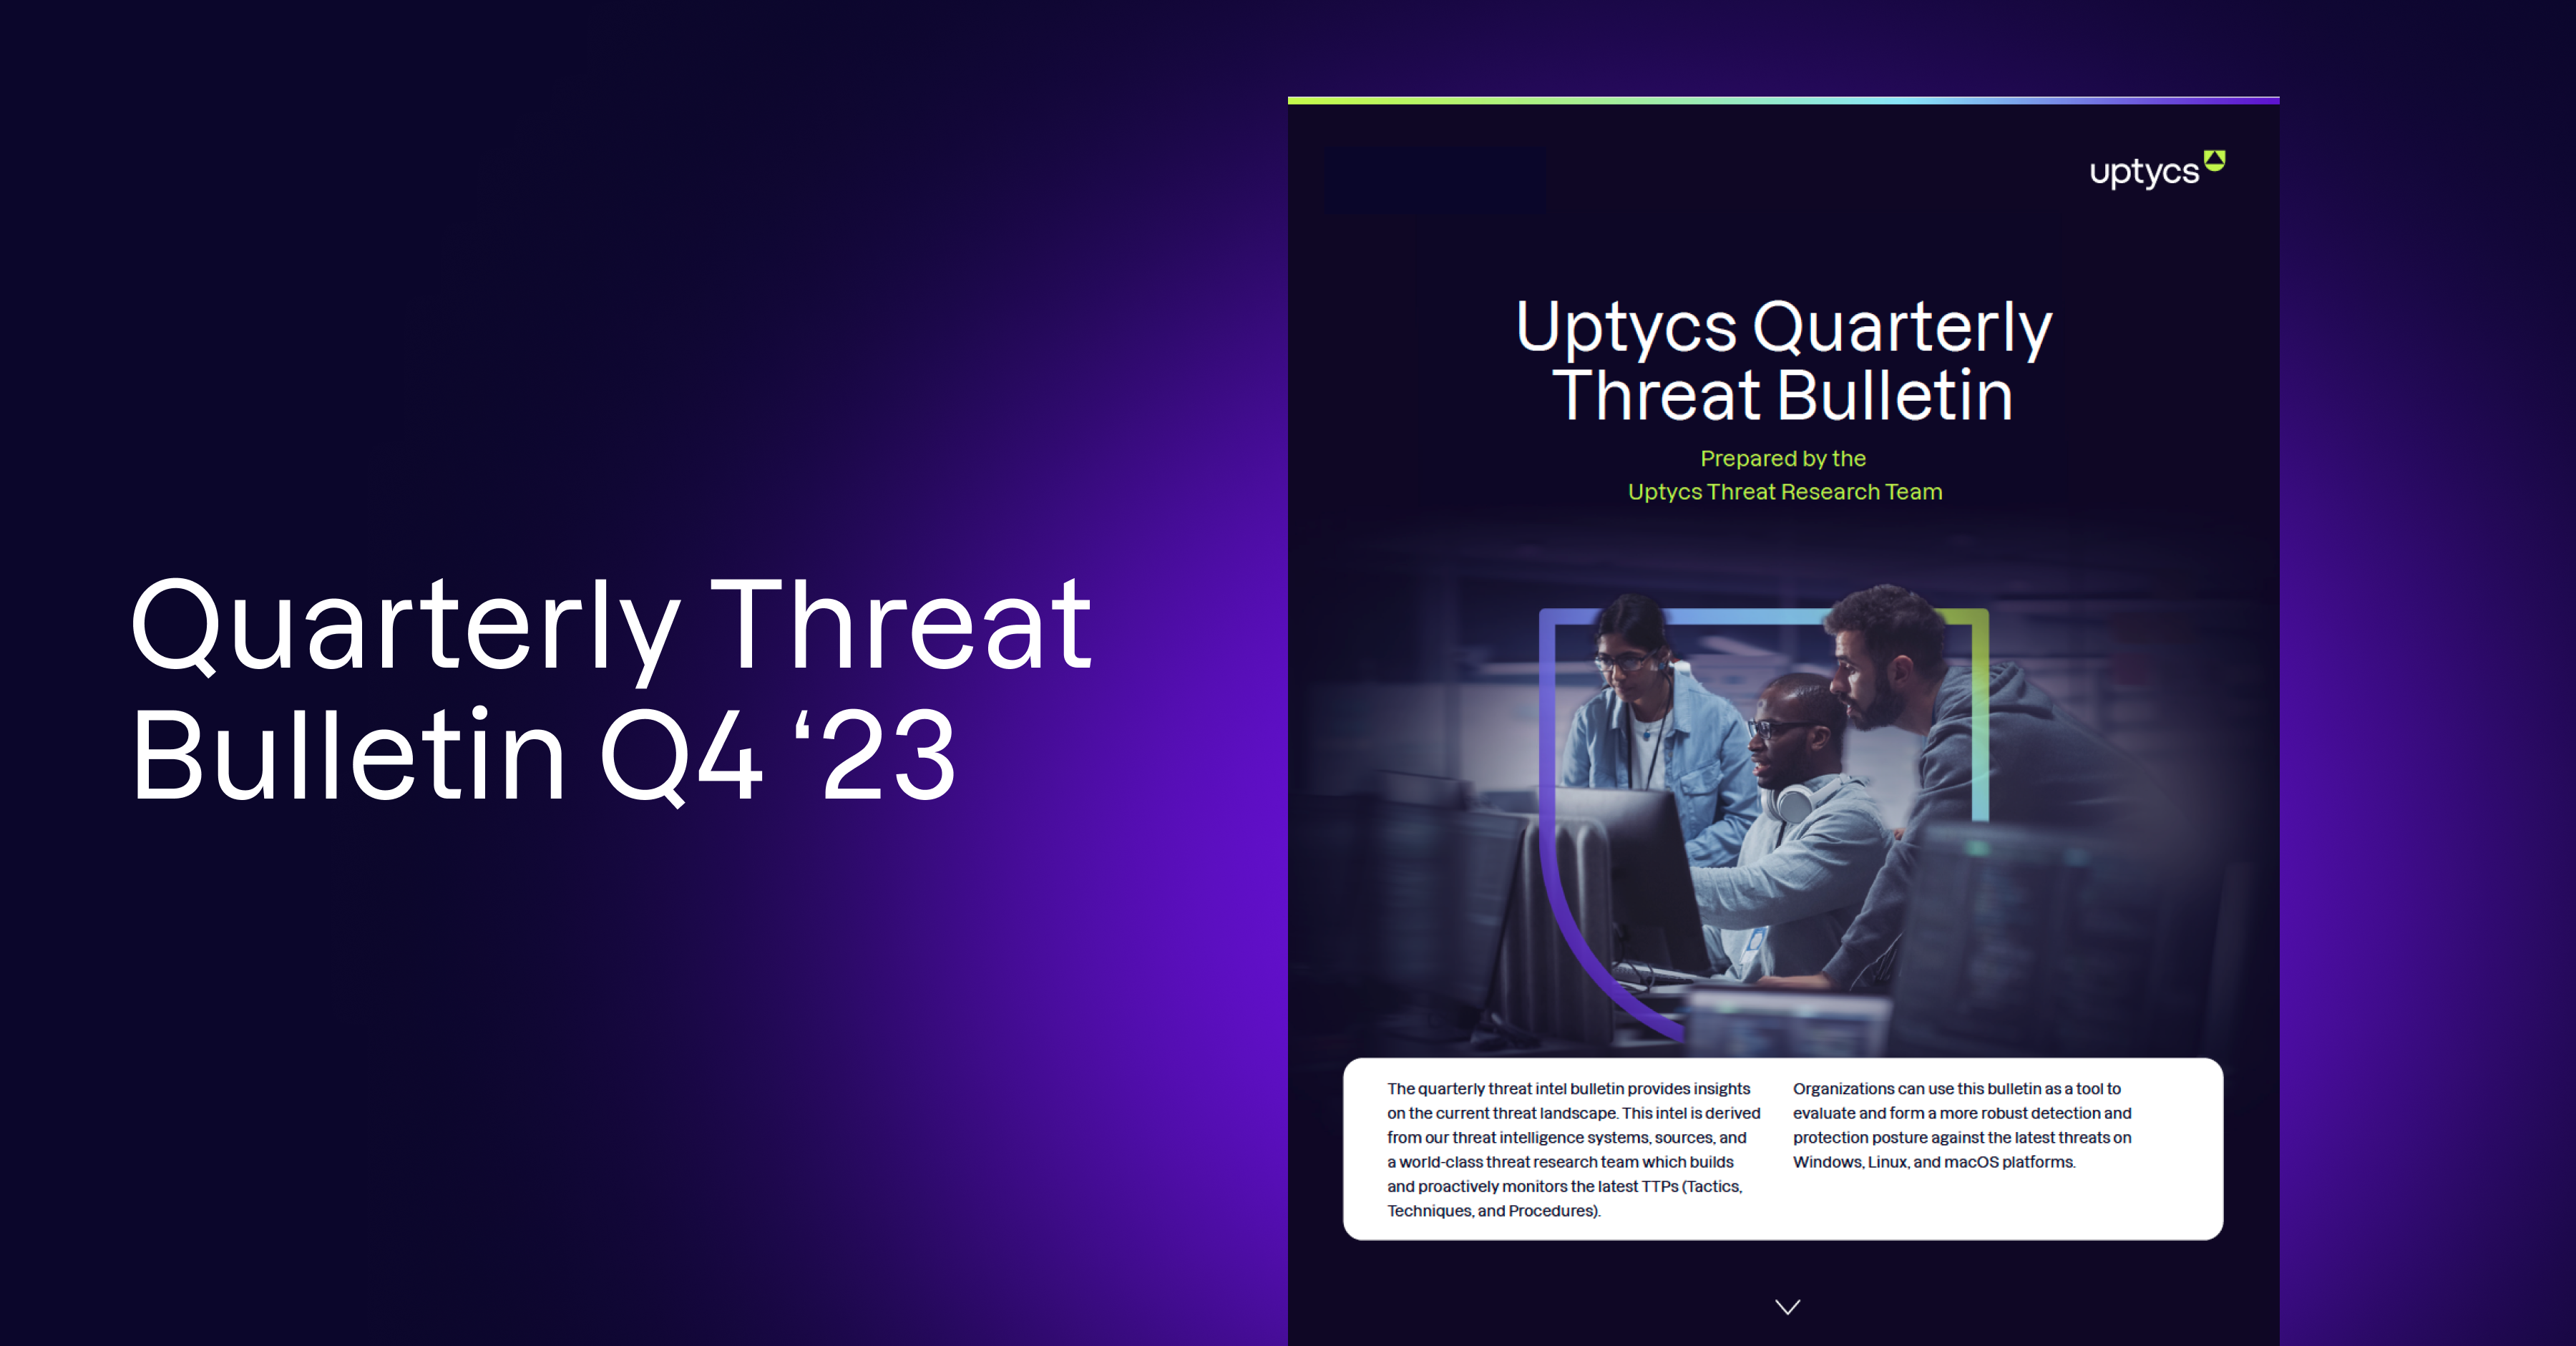 uptycs’ quarterly threat bulletin for Q4 of 2023 overlaid on a purple background card